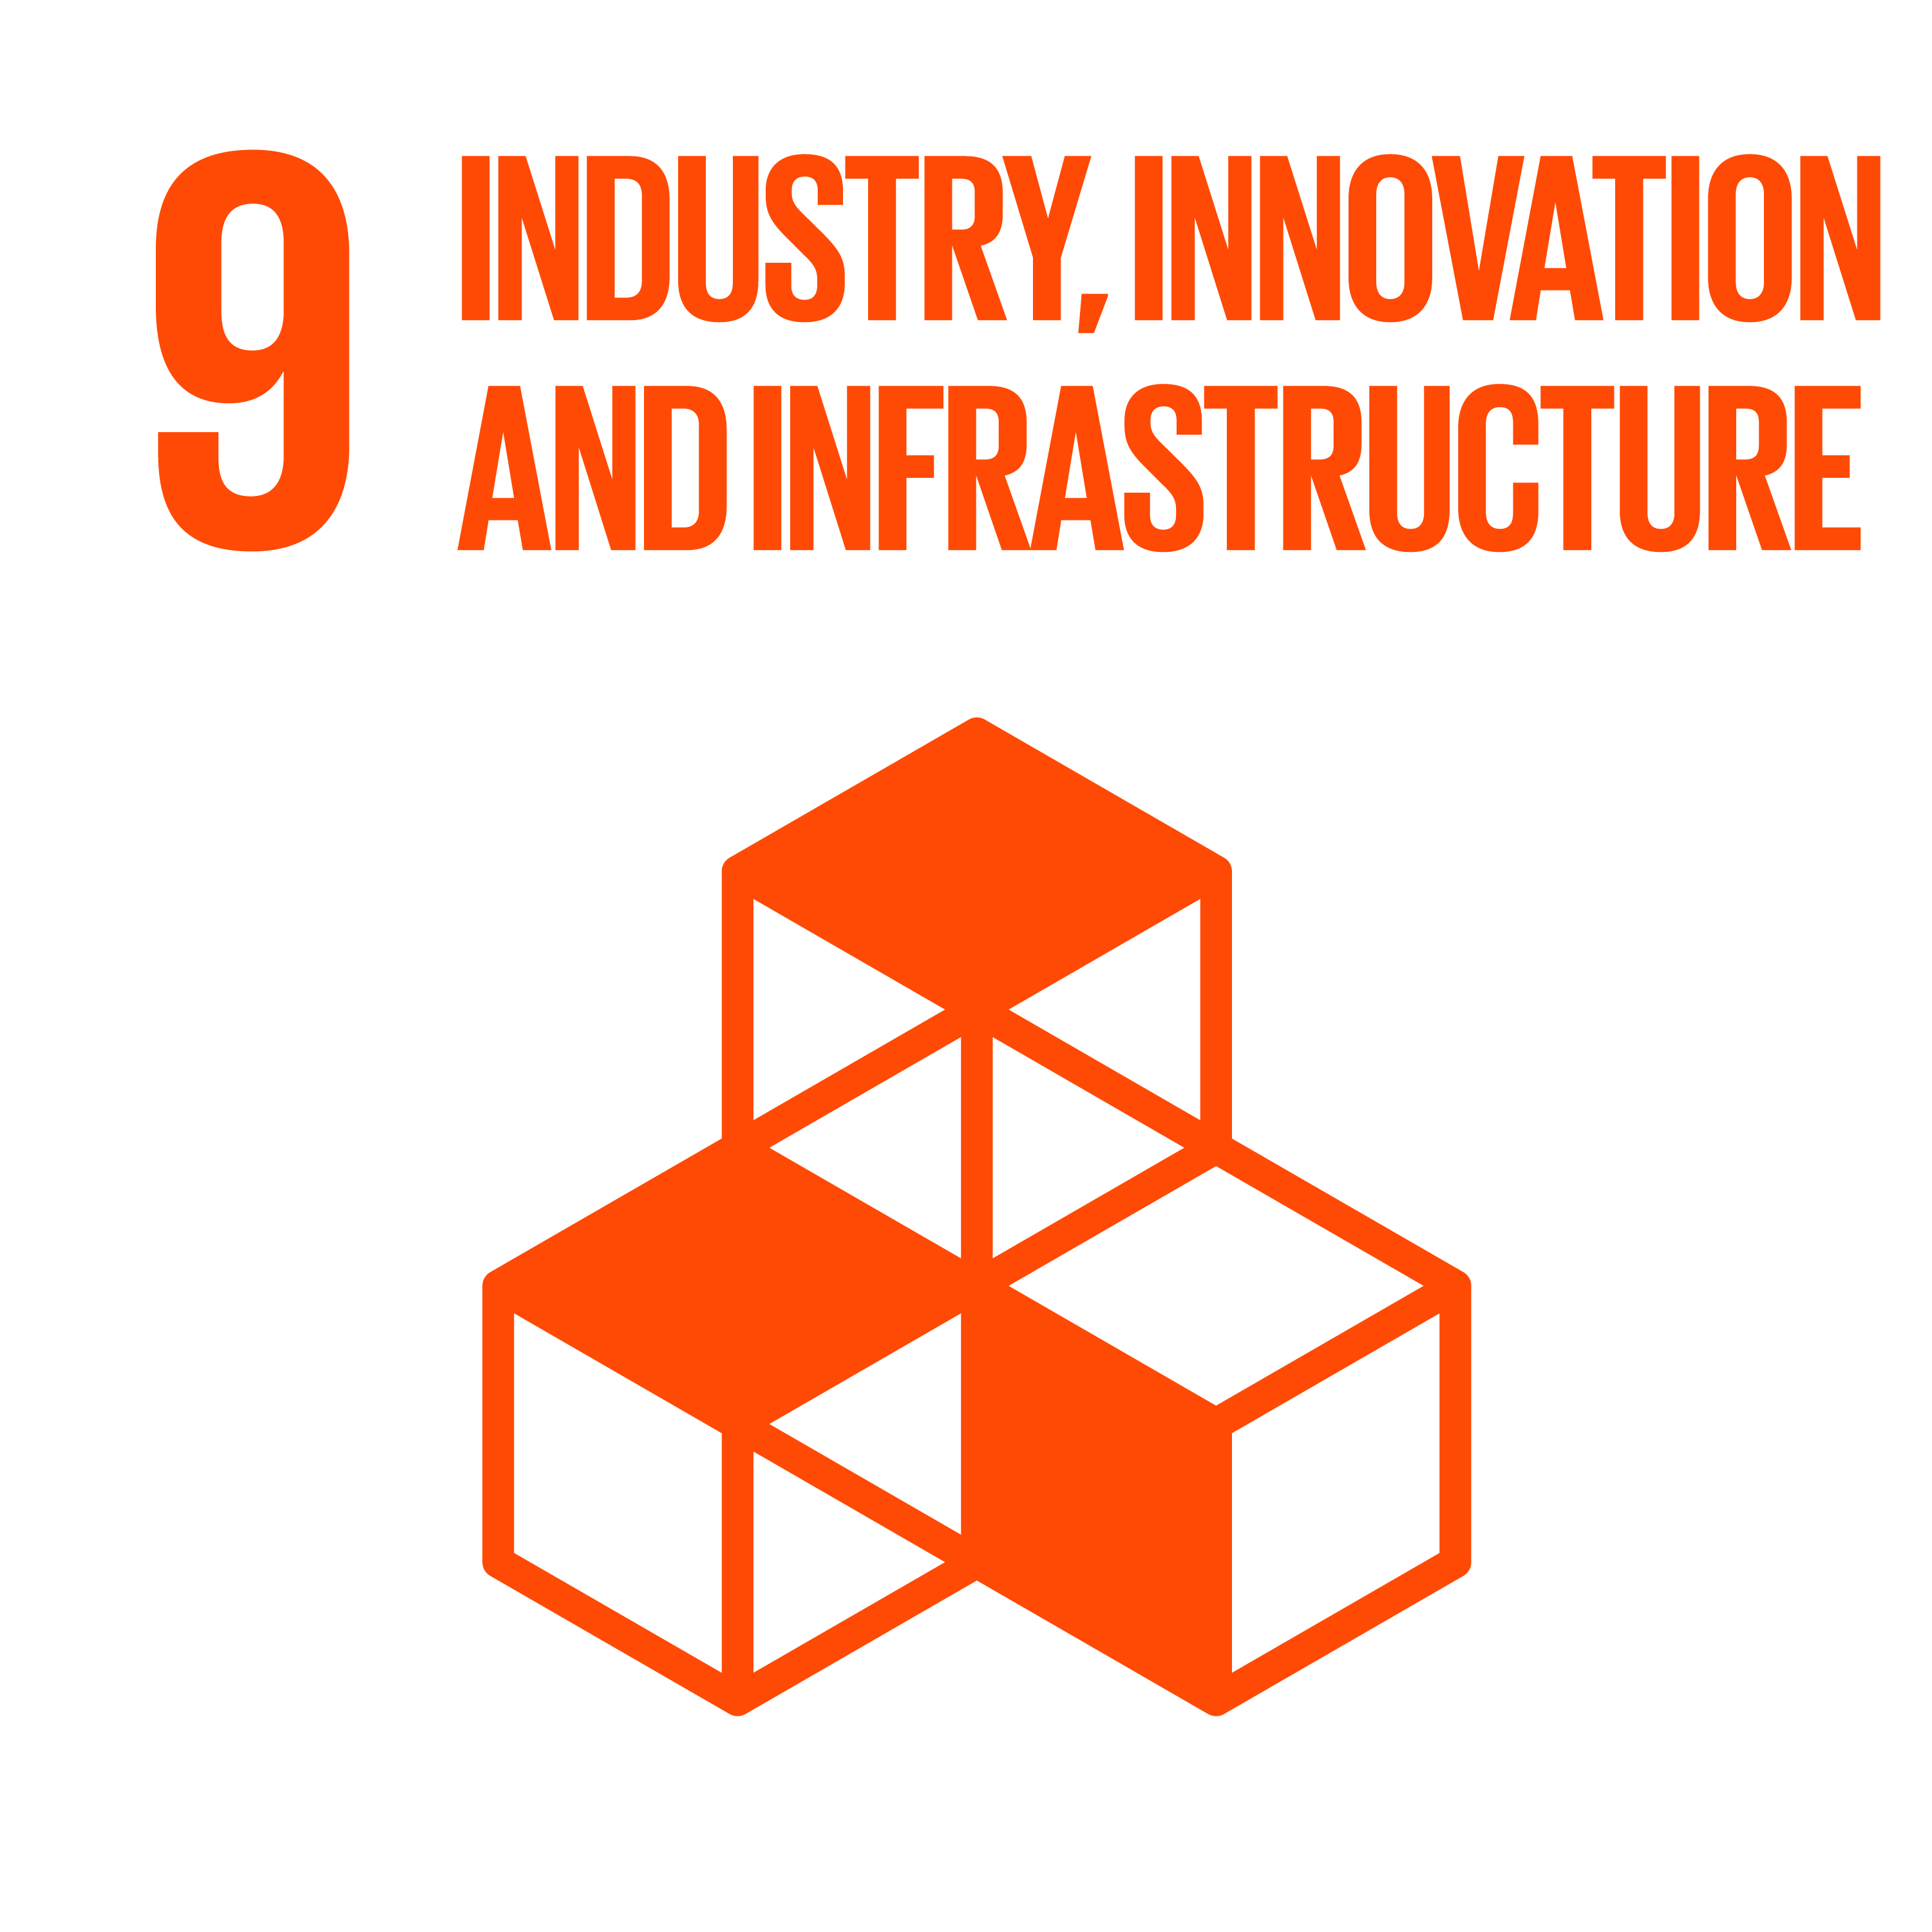 Sustainable development goals: Number 9 - Industry, innovation and infrastructure